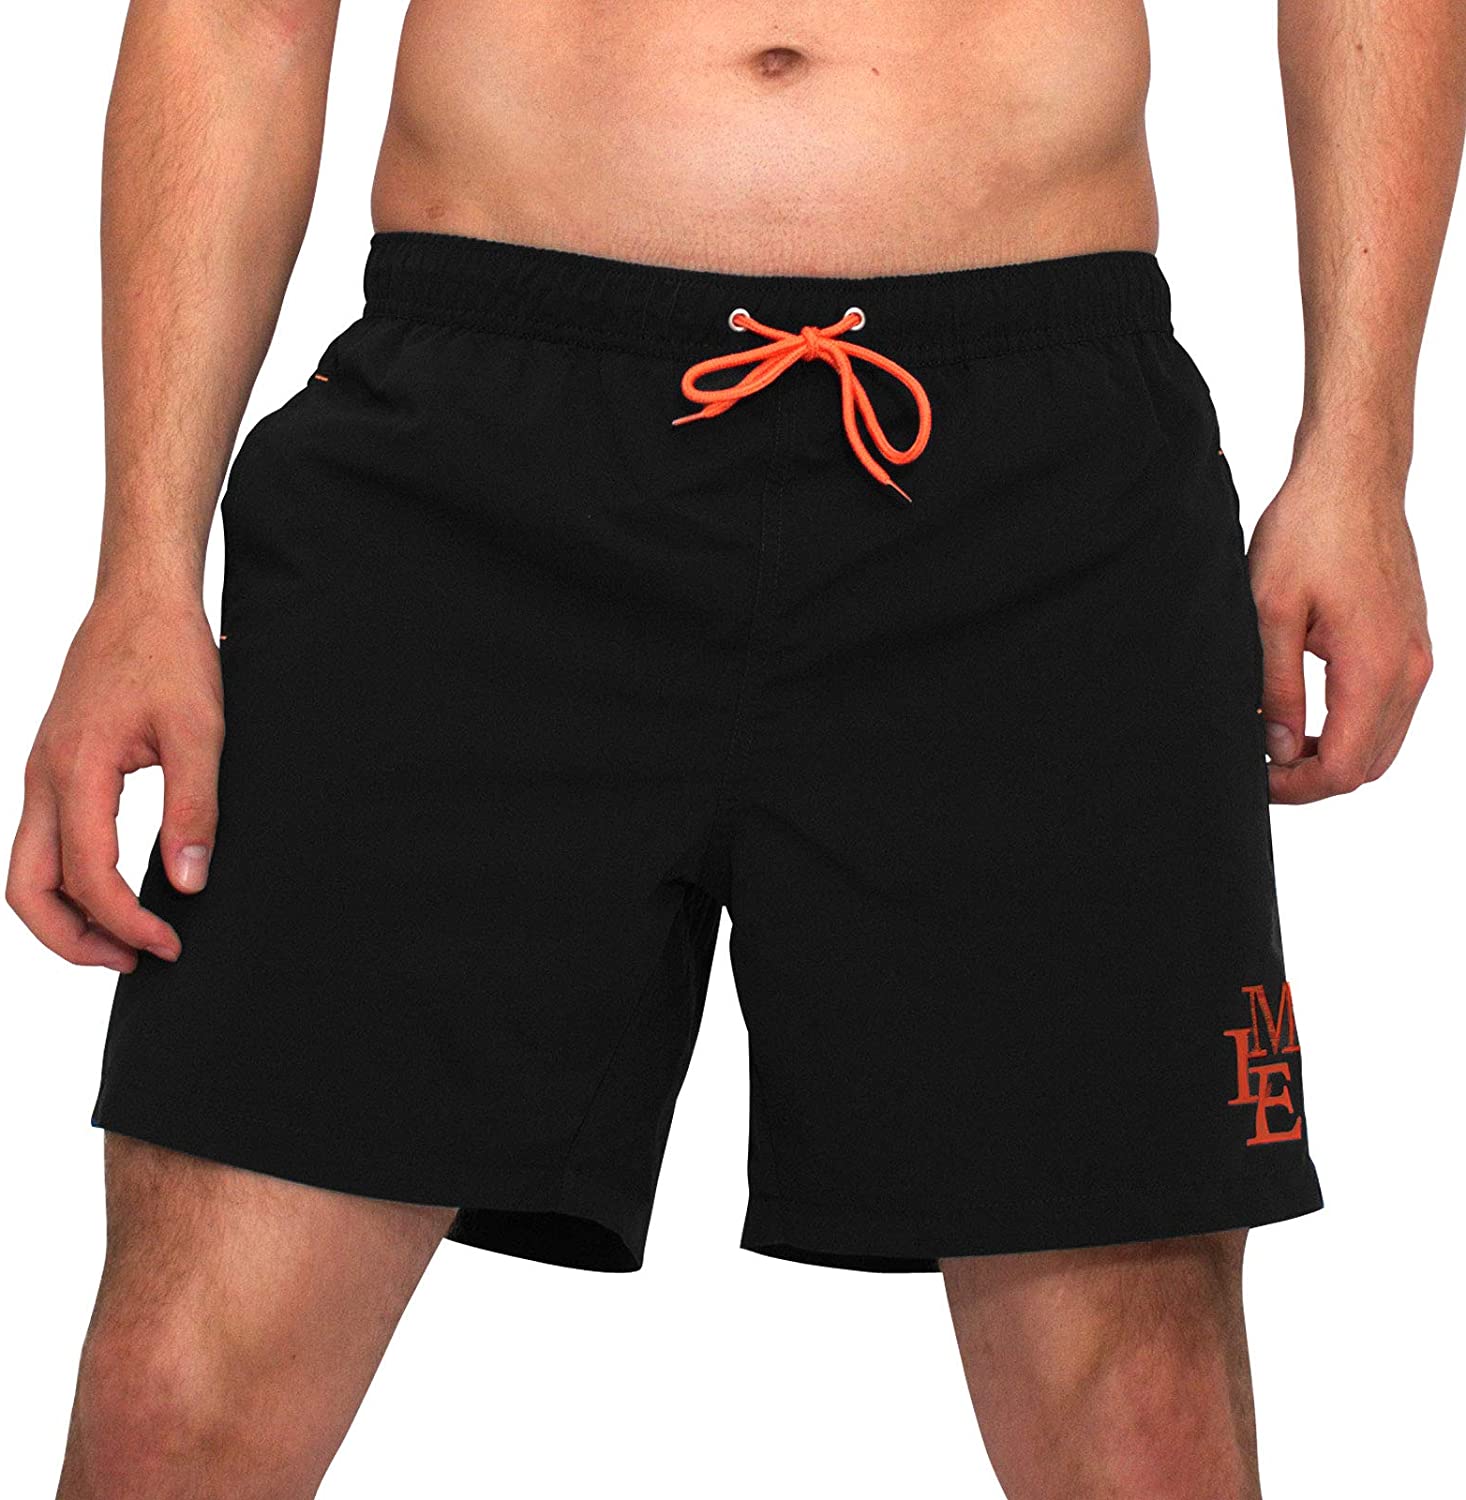 MEILONGER Men's Swim Trunks Swimwear Quick Dry Beach Swimming Board Shorts Bathing Suits with Mesh Lining and Pockets